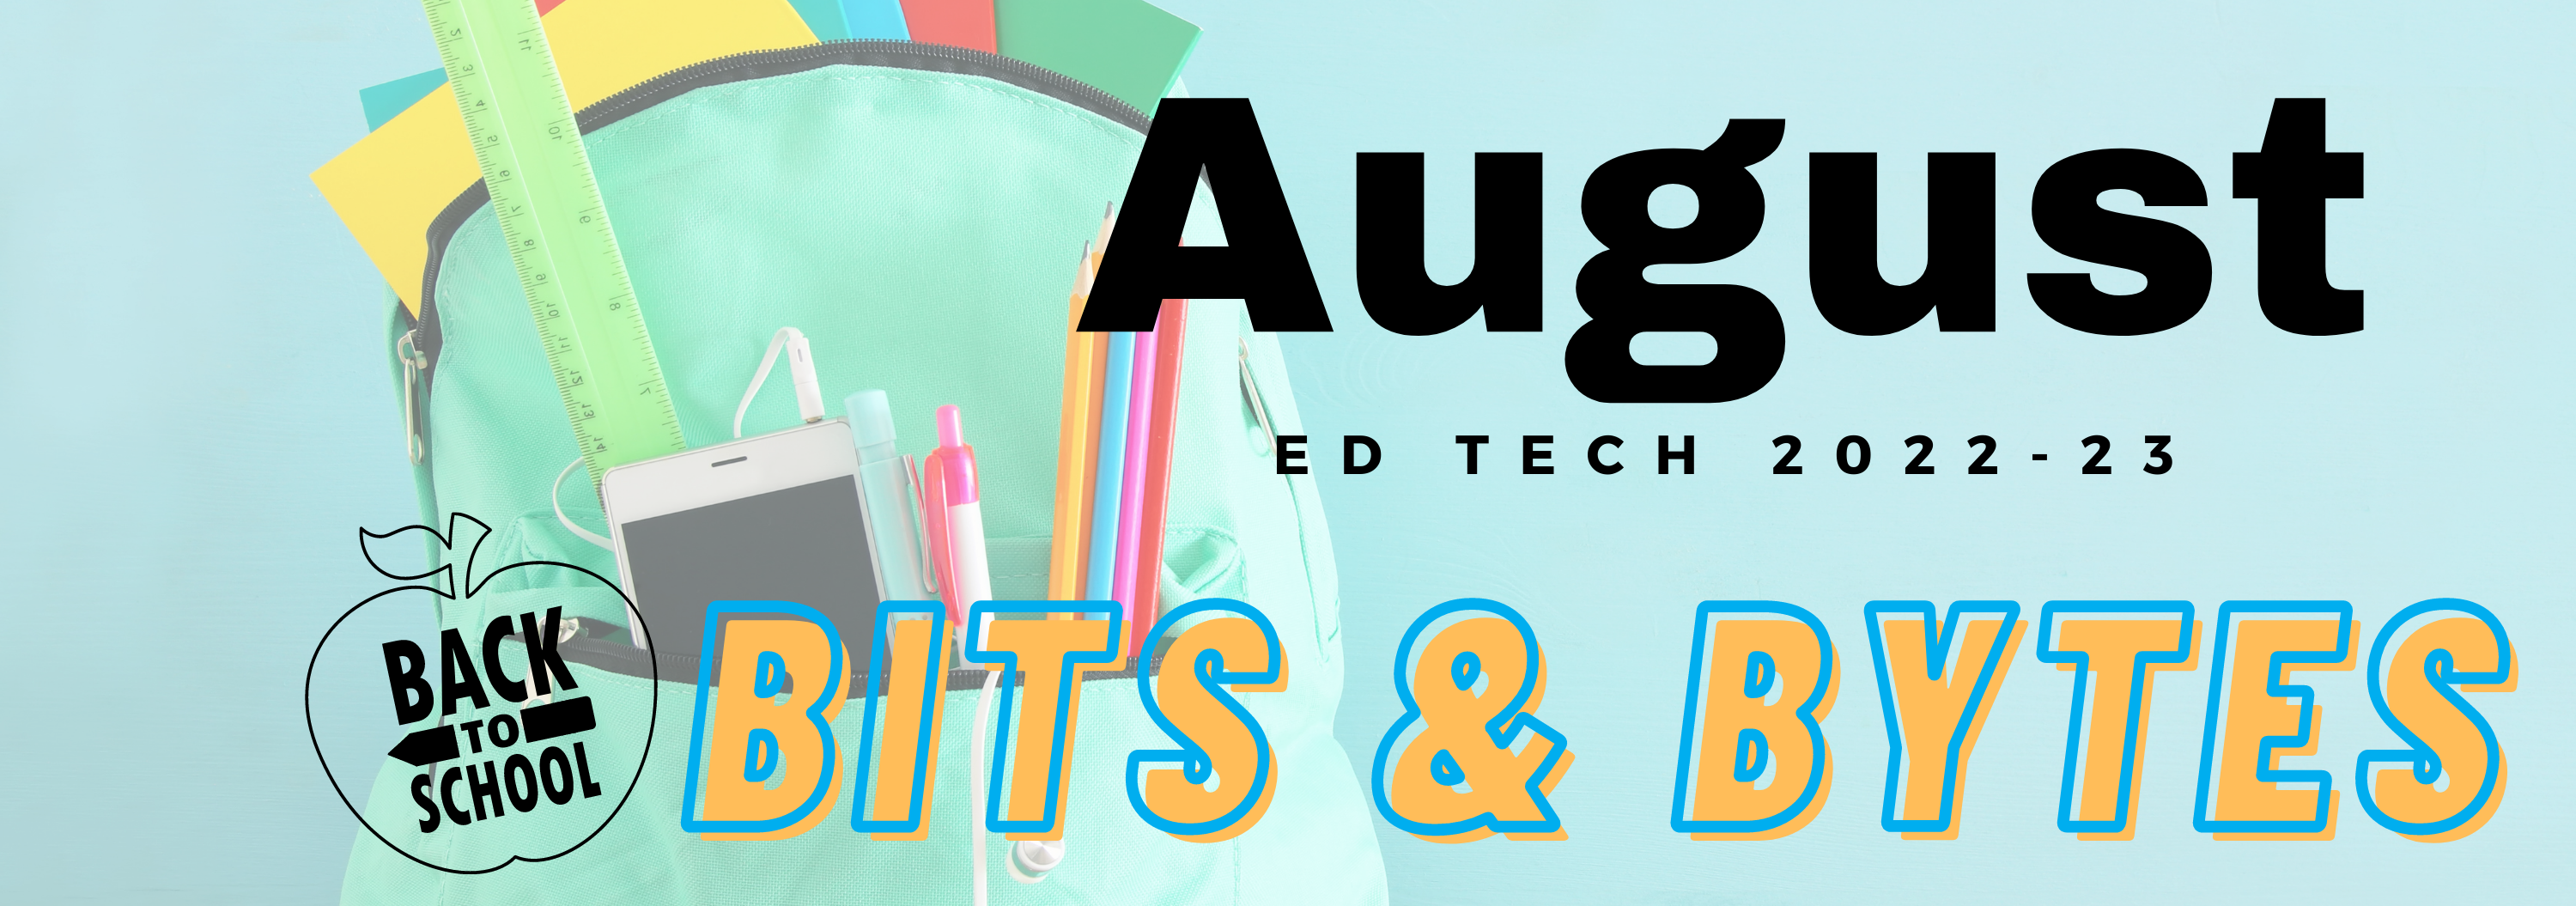 Bits and Bytes eNewsletter for August 2022